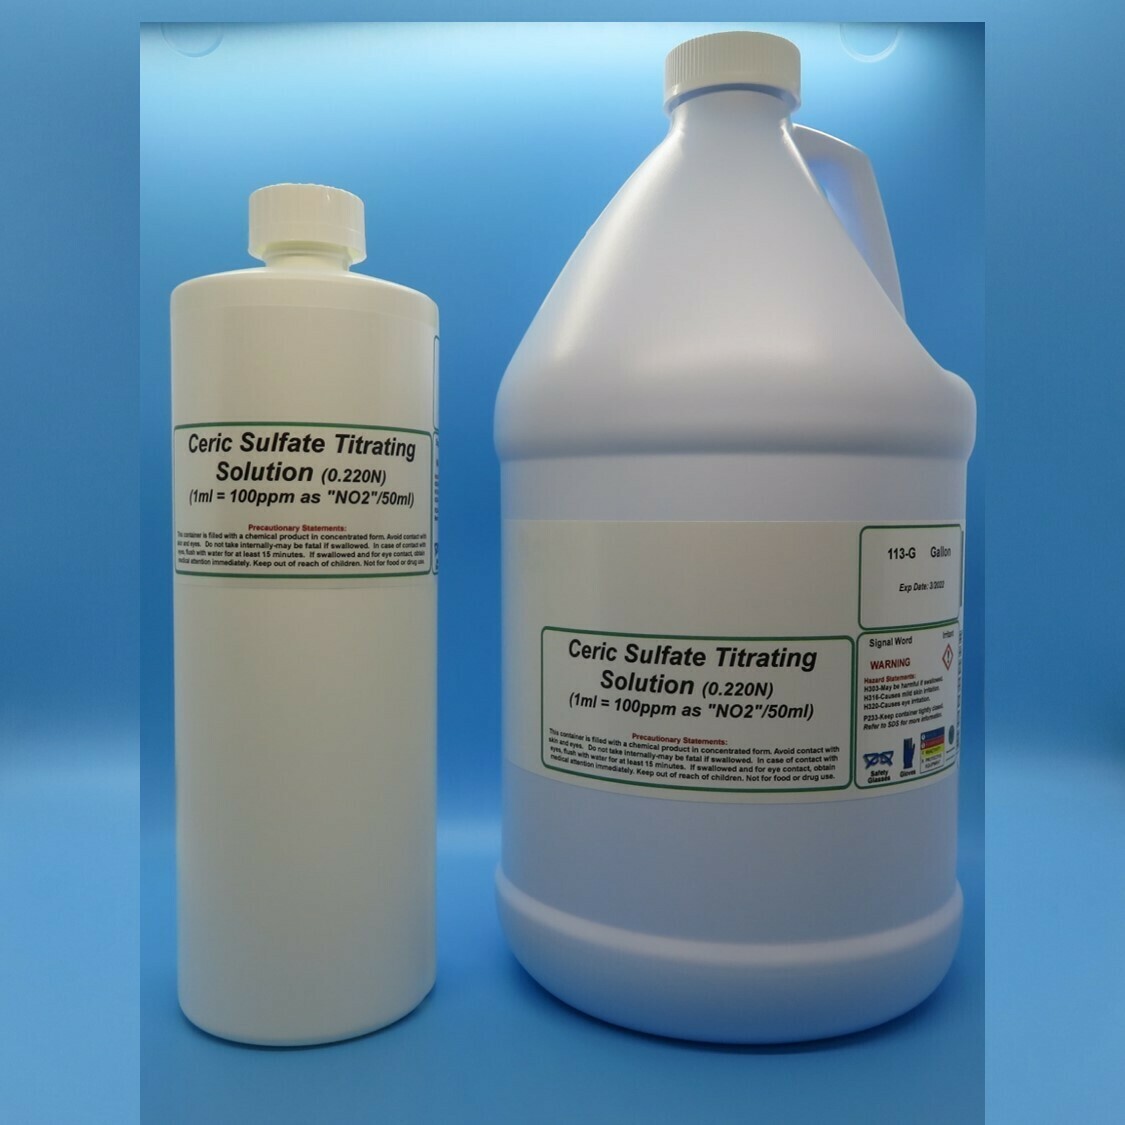 Ceric Sulfate Titrating Solution (0.22N) 
(1 ml=100 ppm NO2/50 ml)